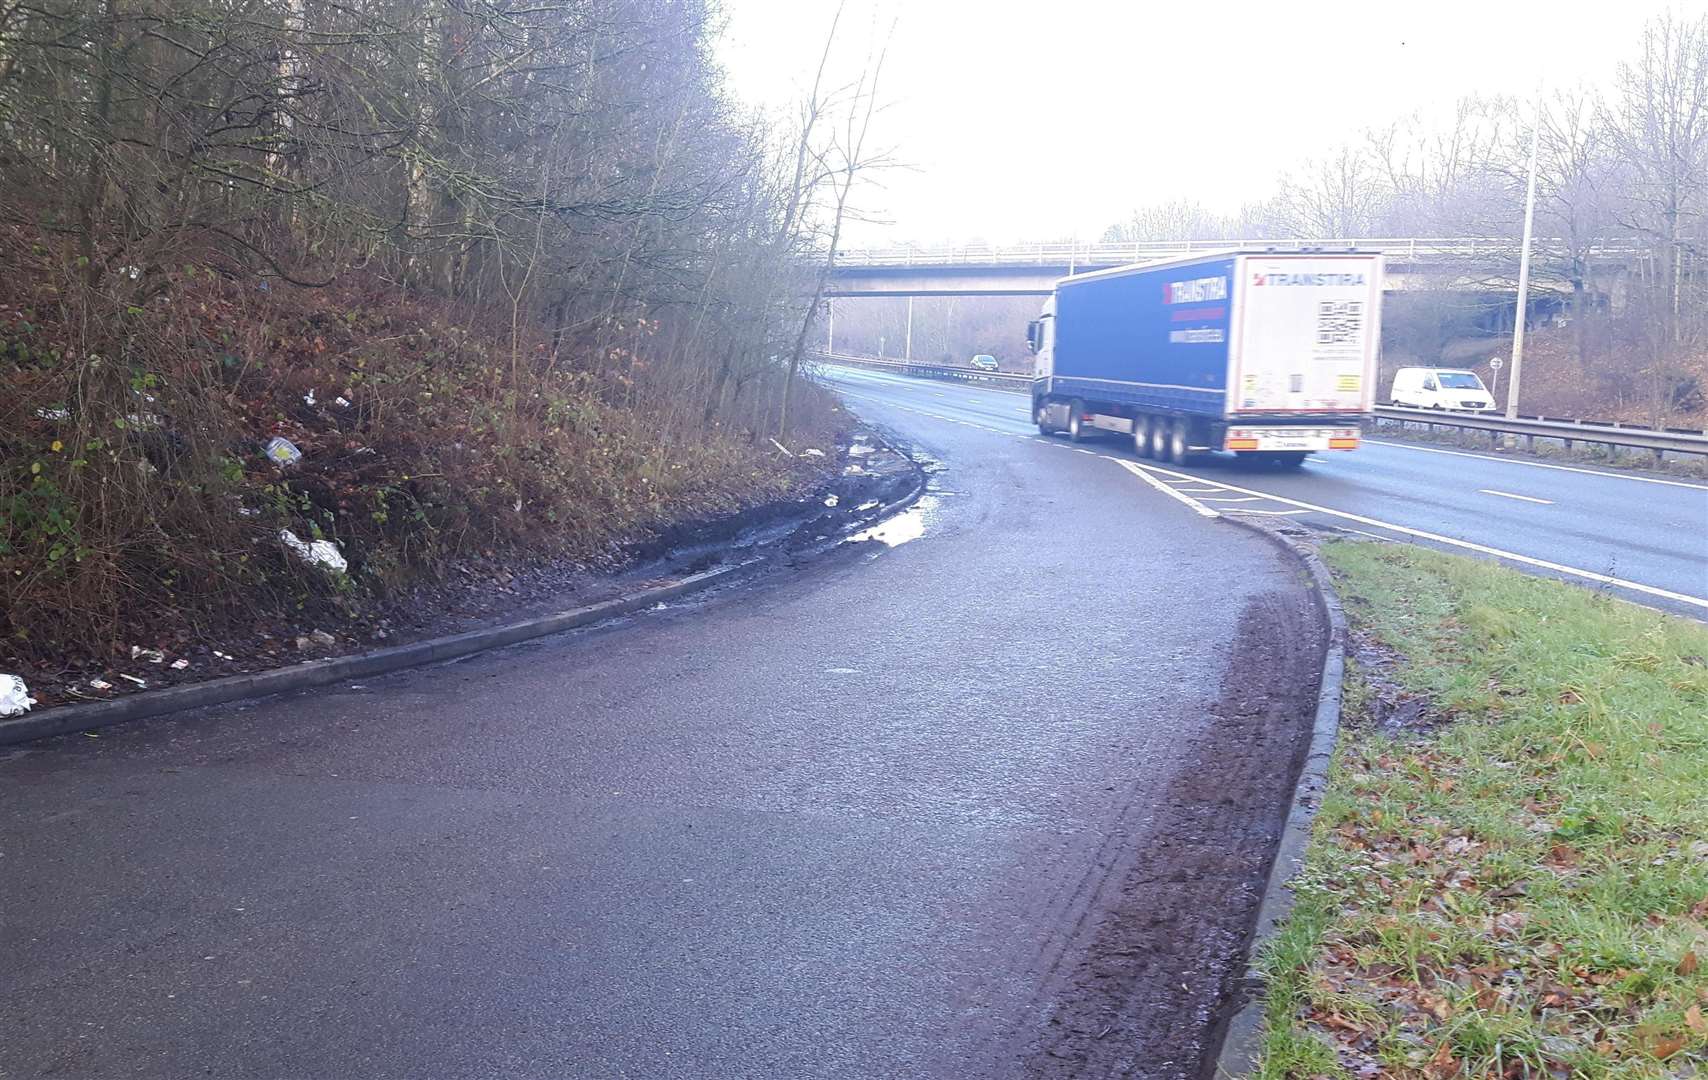 The lay-by on the A2 where the three men were killed